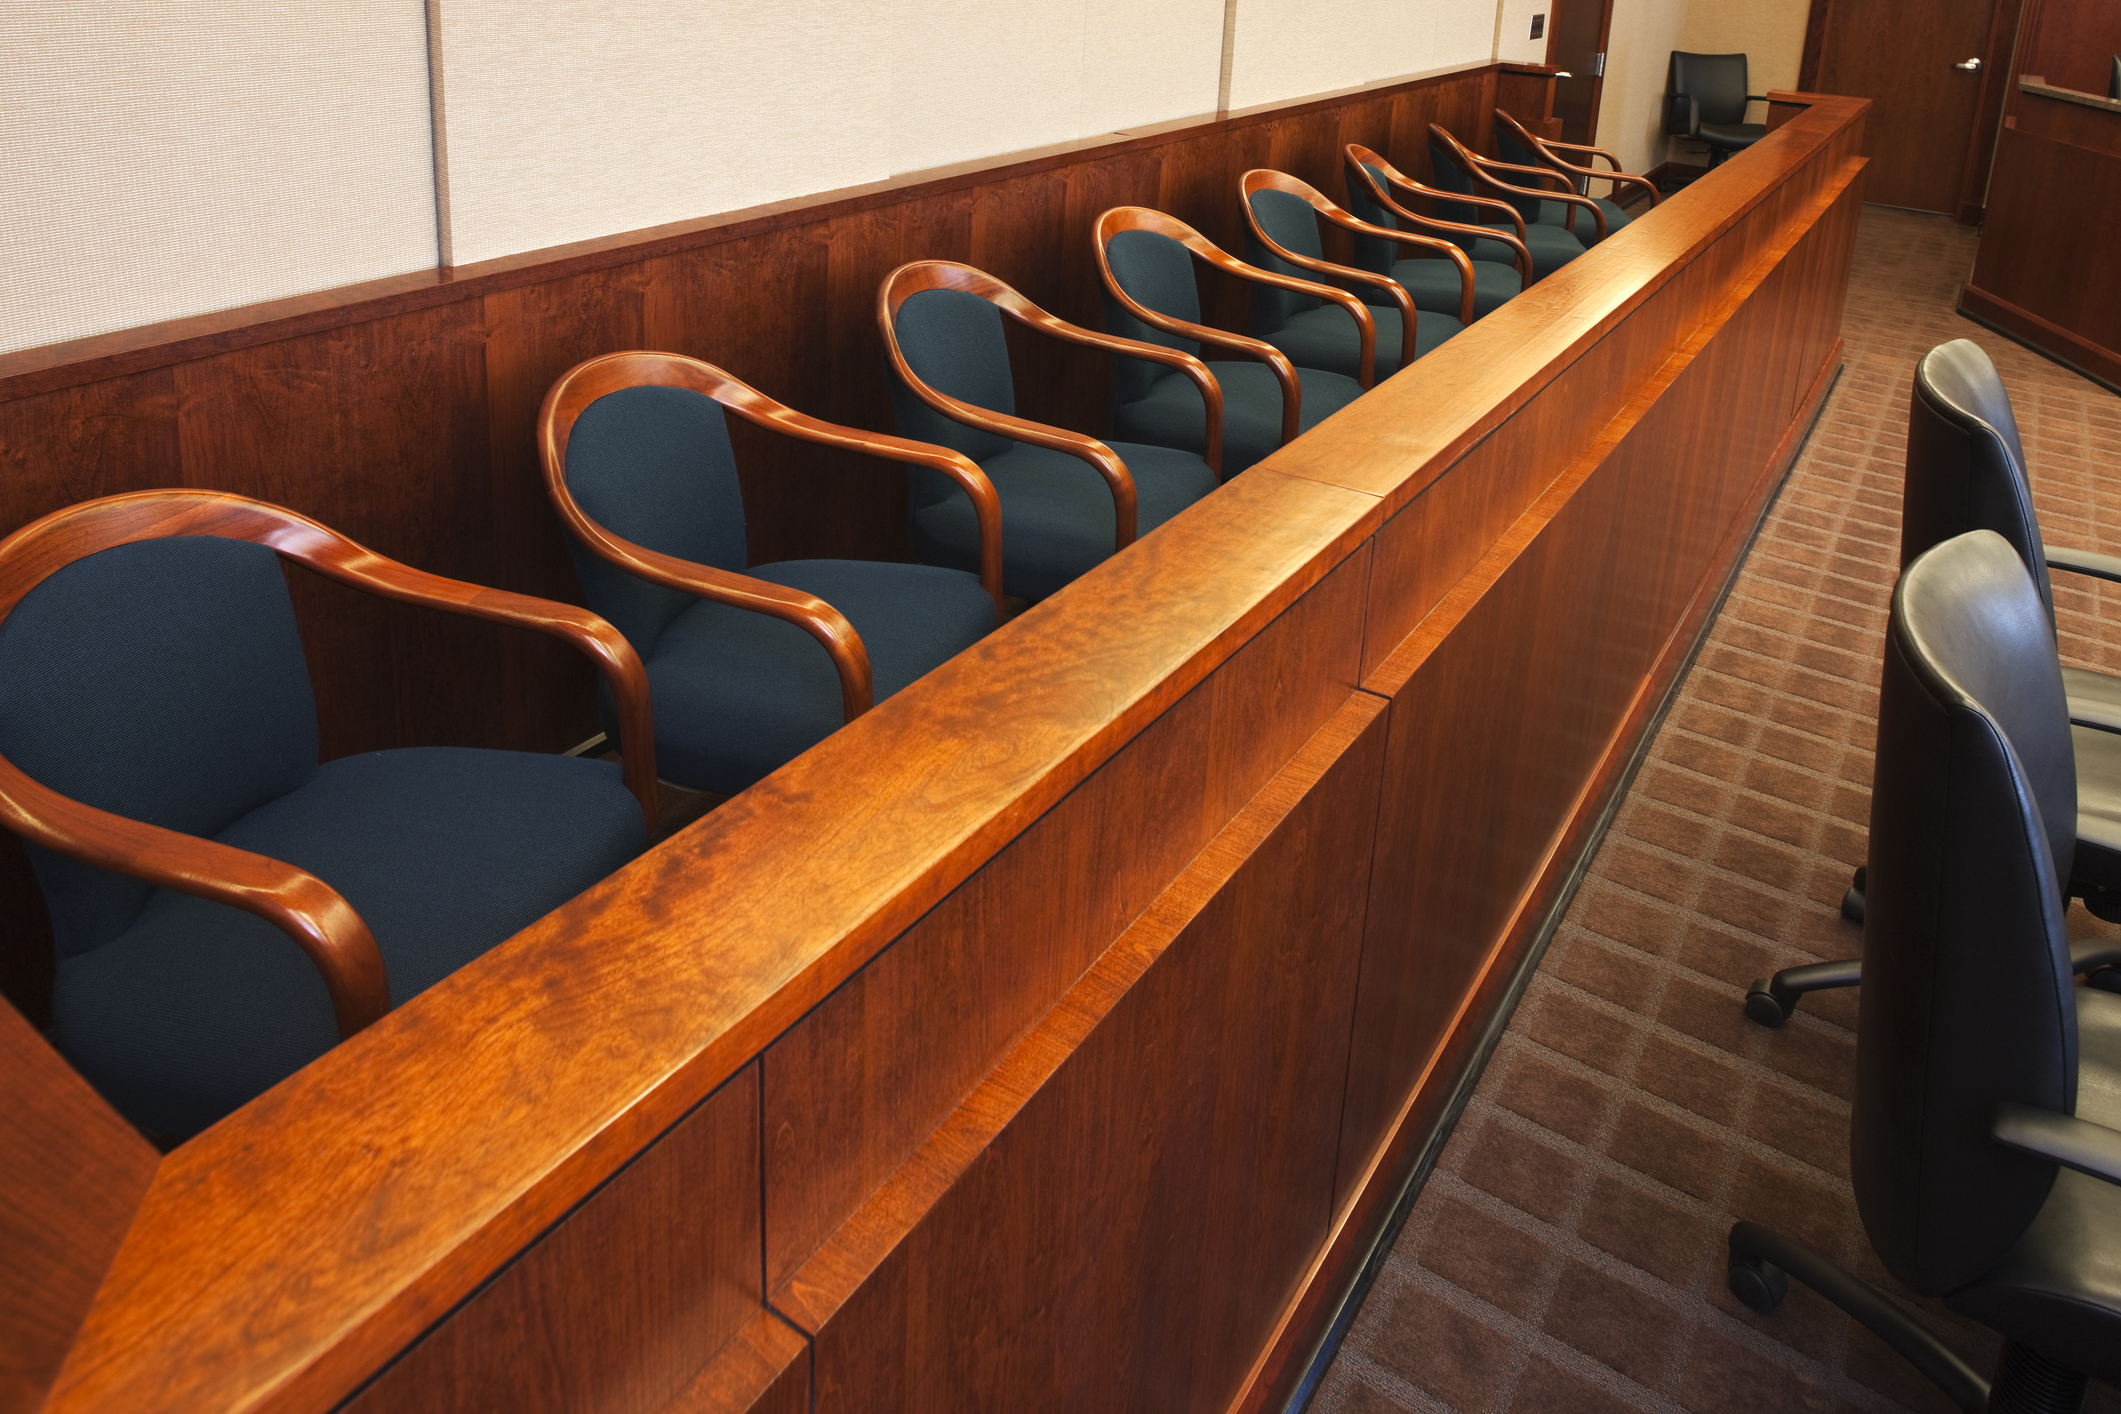 Modular Court Facilities Provide Solutions For a Justice System Under Pressure